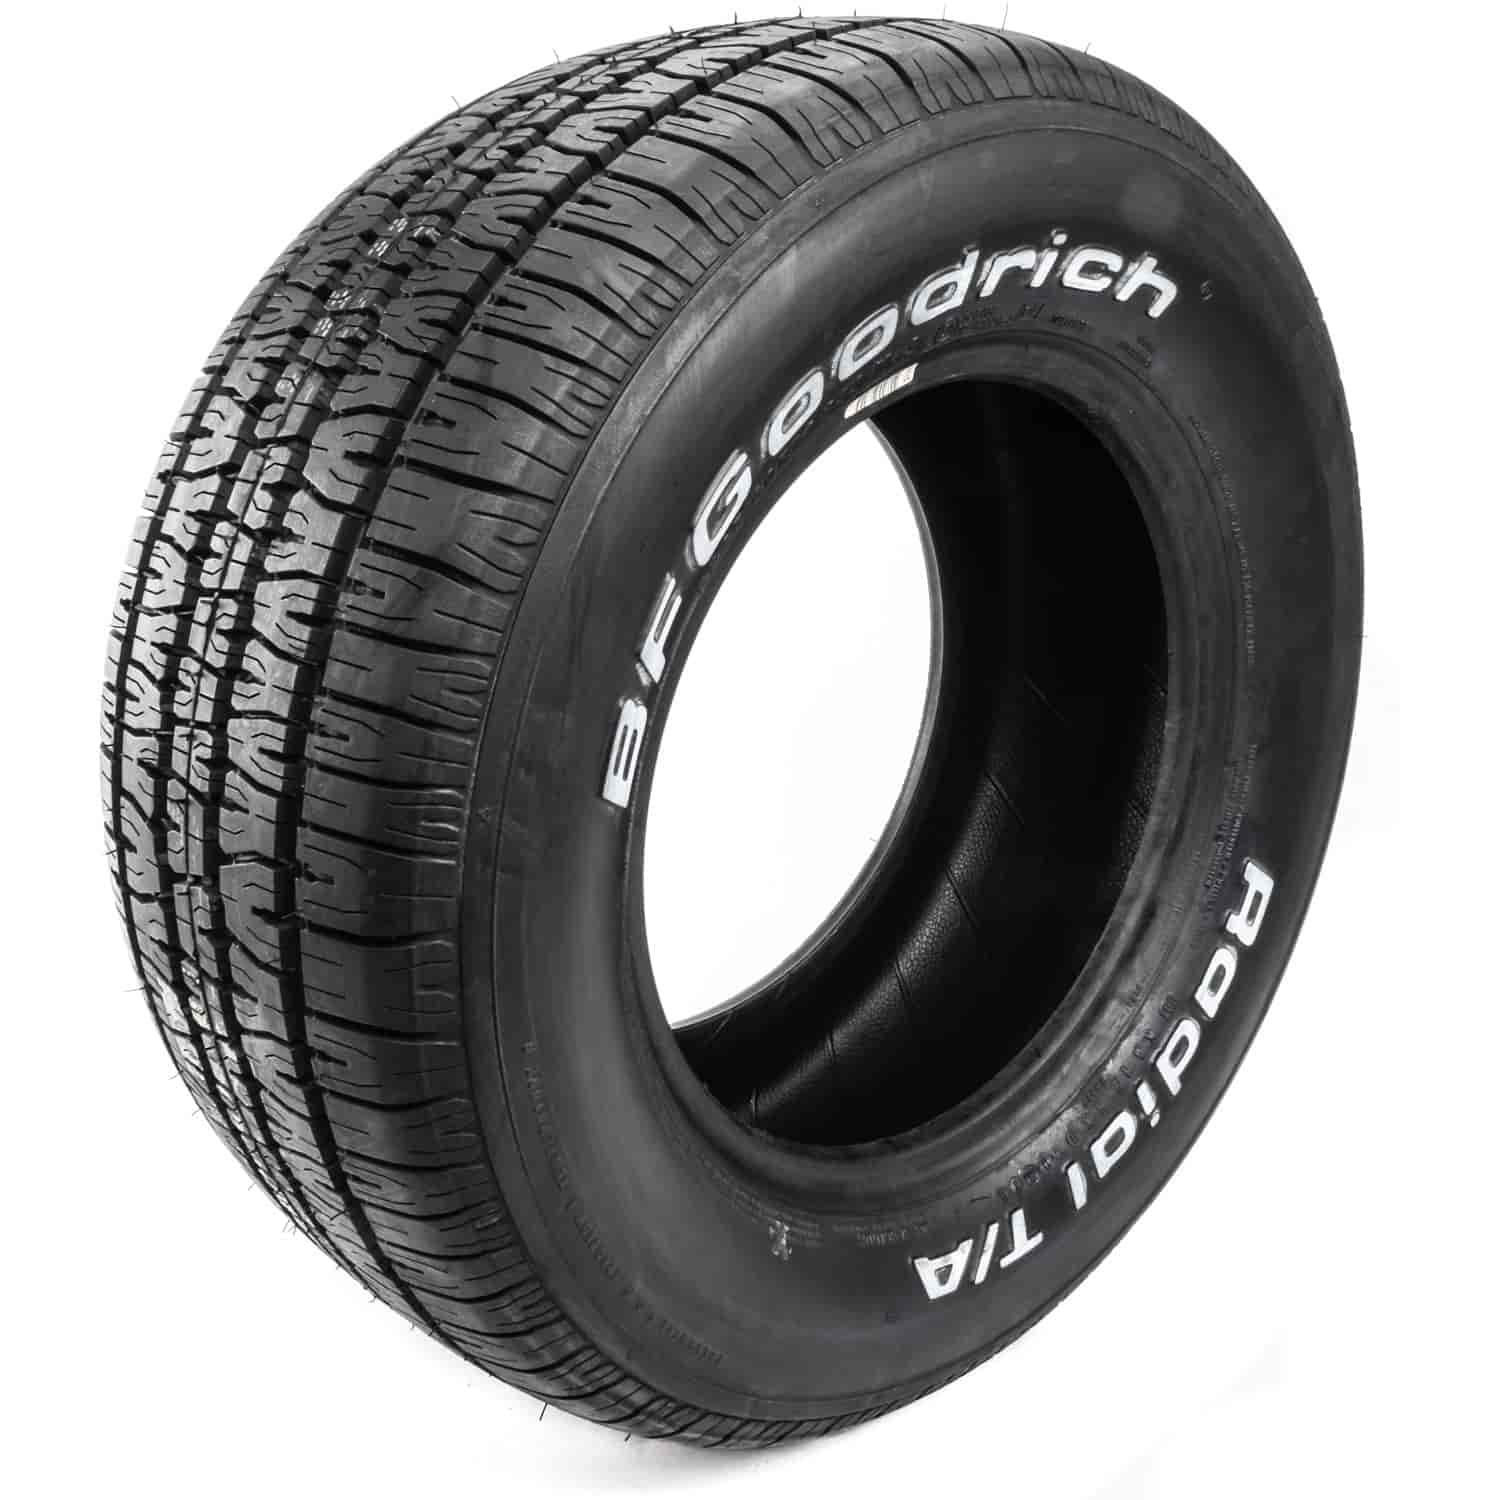 Radial T/A Tire P245/60SR14